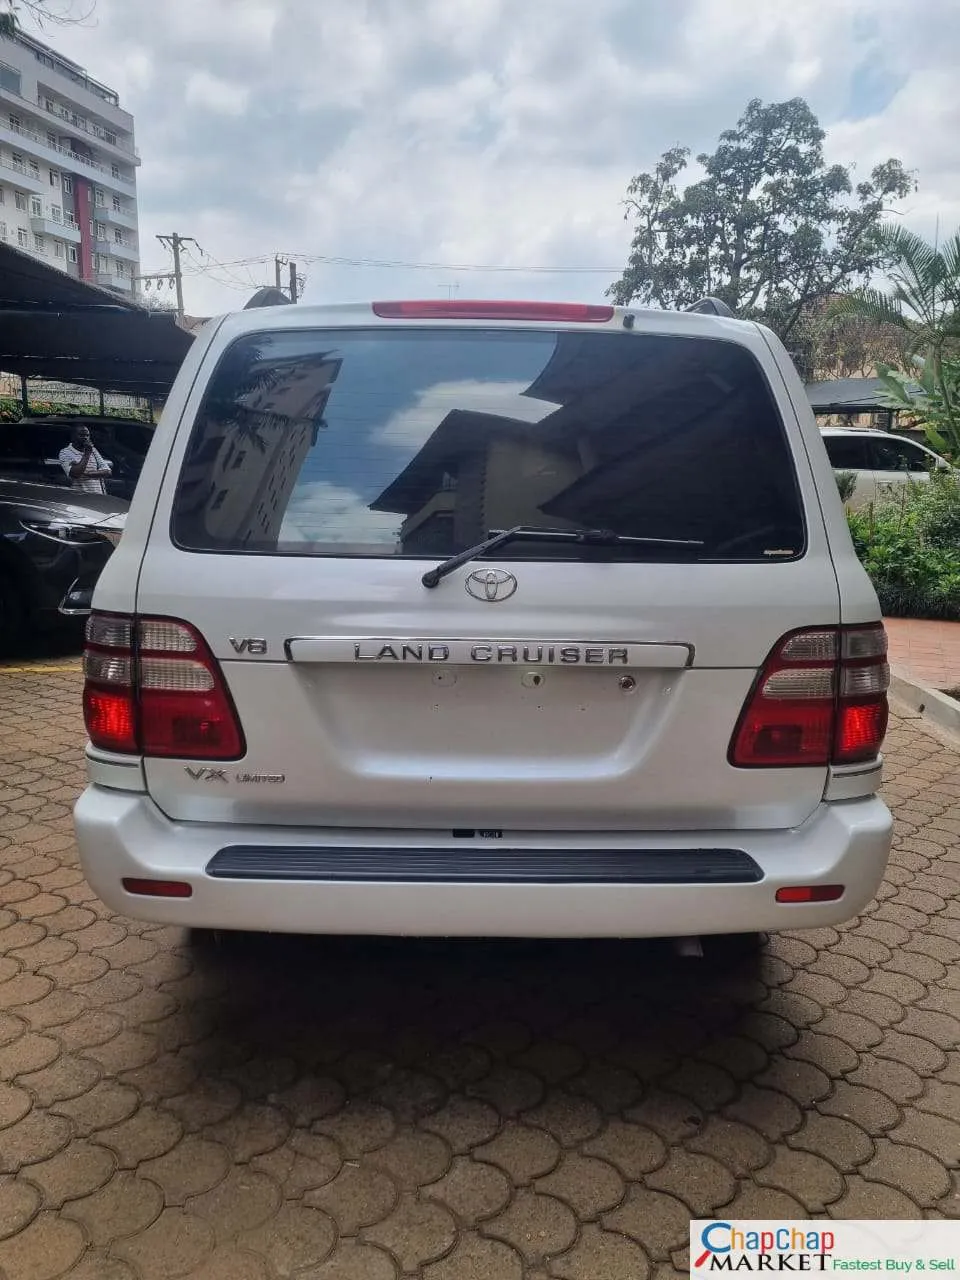 Cars Cars For Sale-Toyota Landcruiser V8 100 SERIES You Pay 30% Deposit Trade in Ok Amazon 100 series for sale in kenya hire purchase installments EXCLUSIVE 9